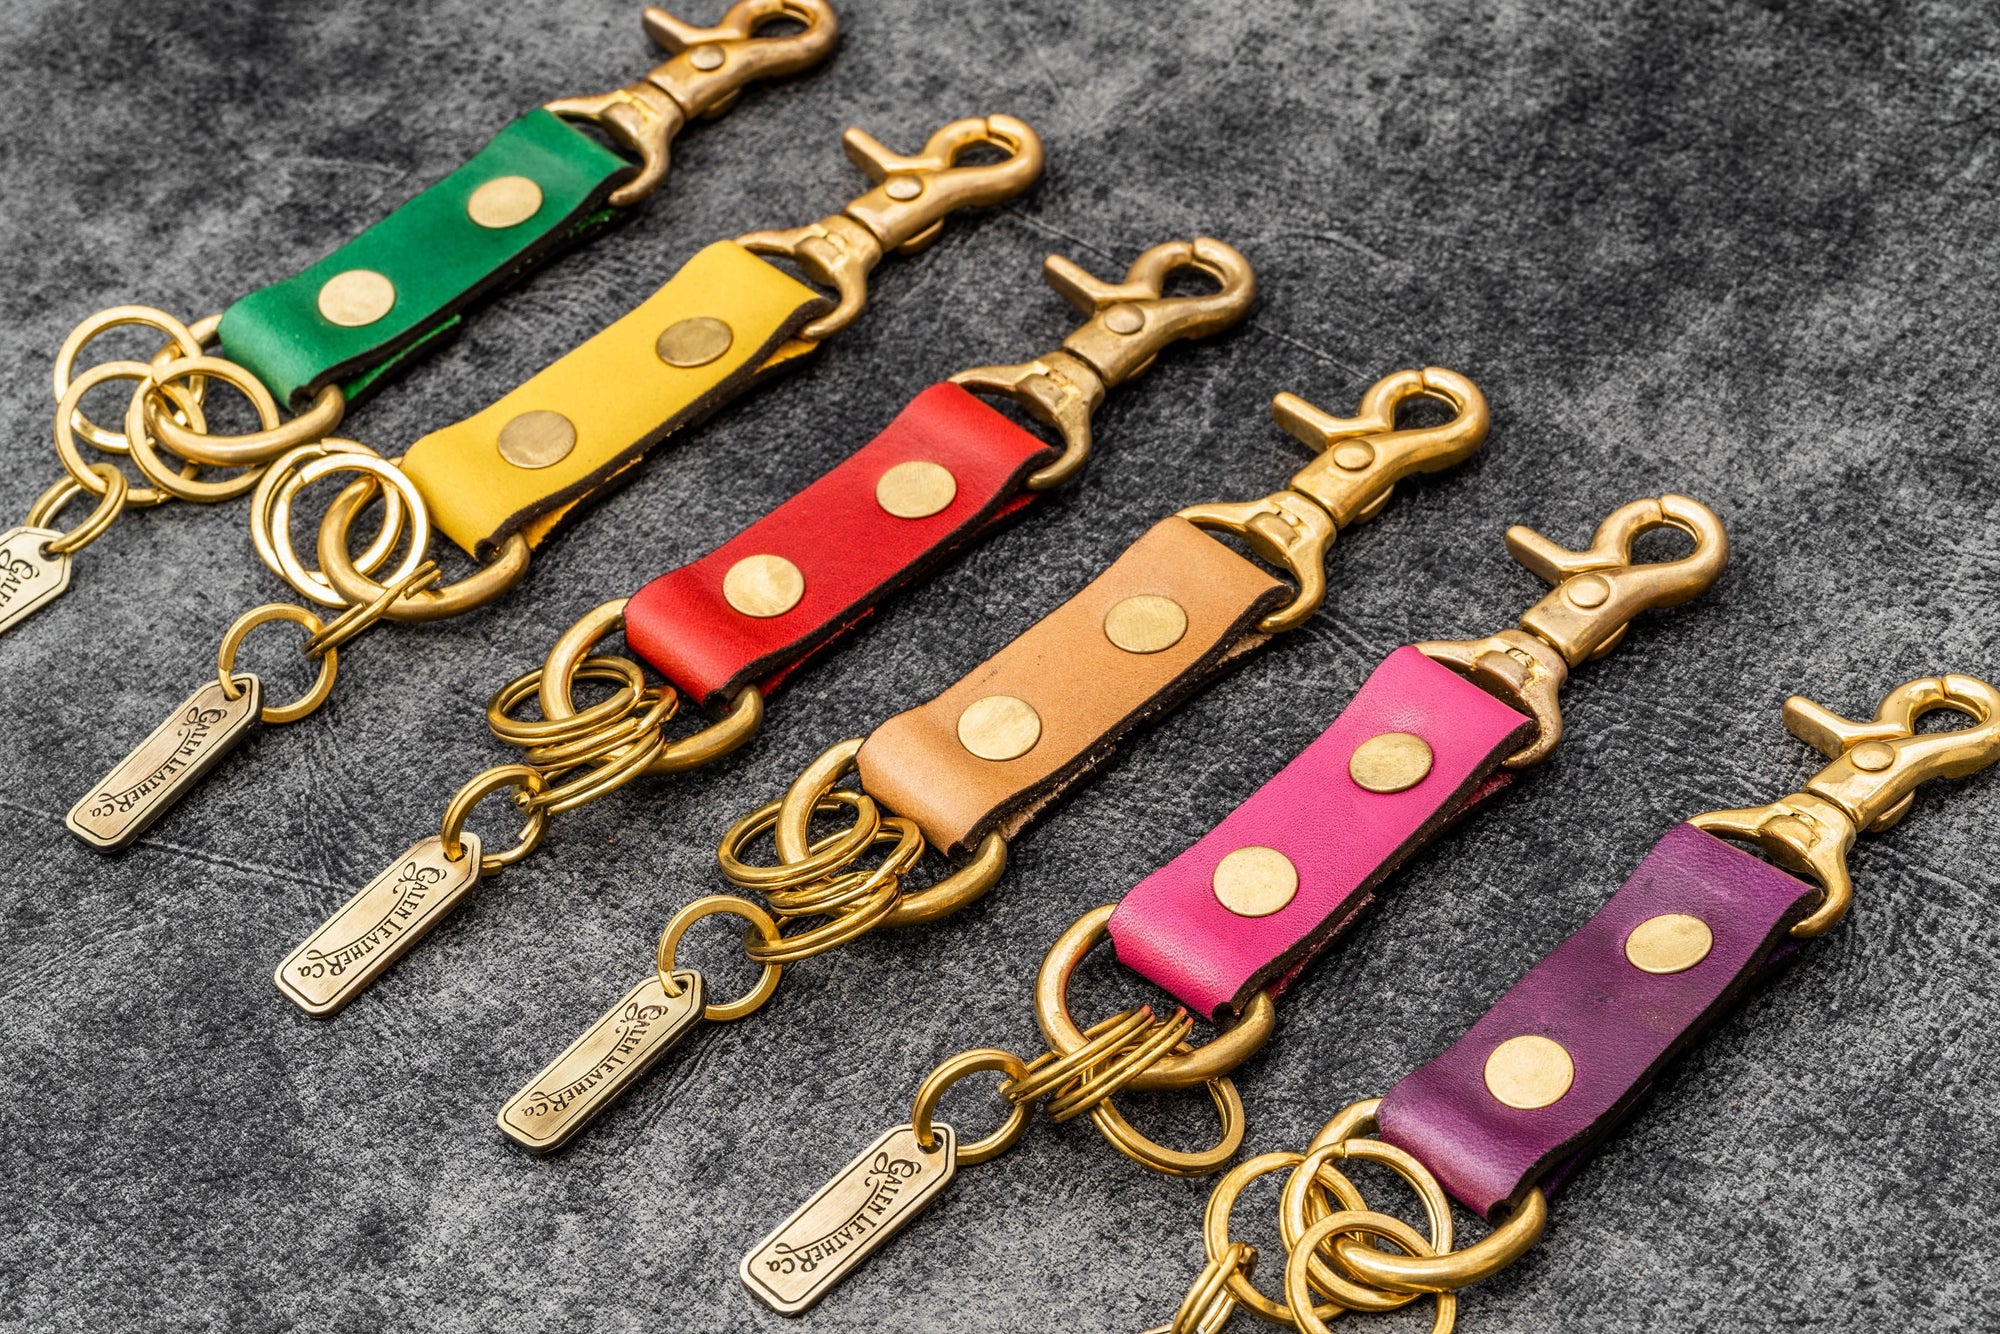 leather-keychain-for-men-custom-color-leather-keychain-etsy-leather